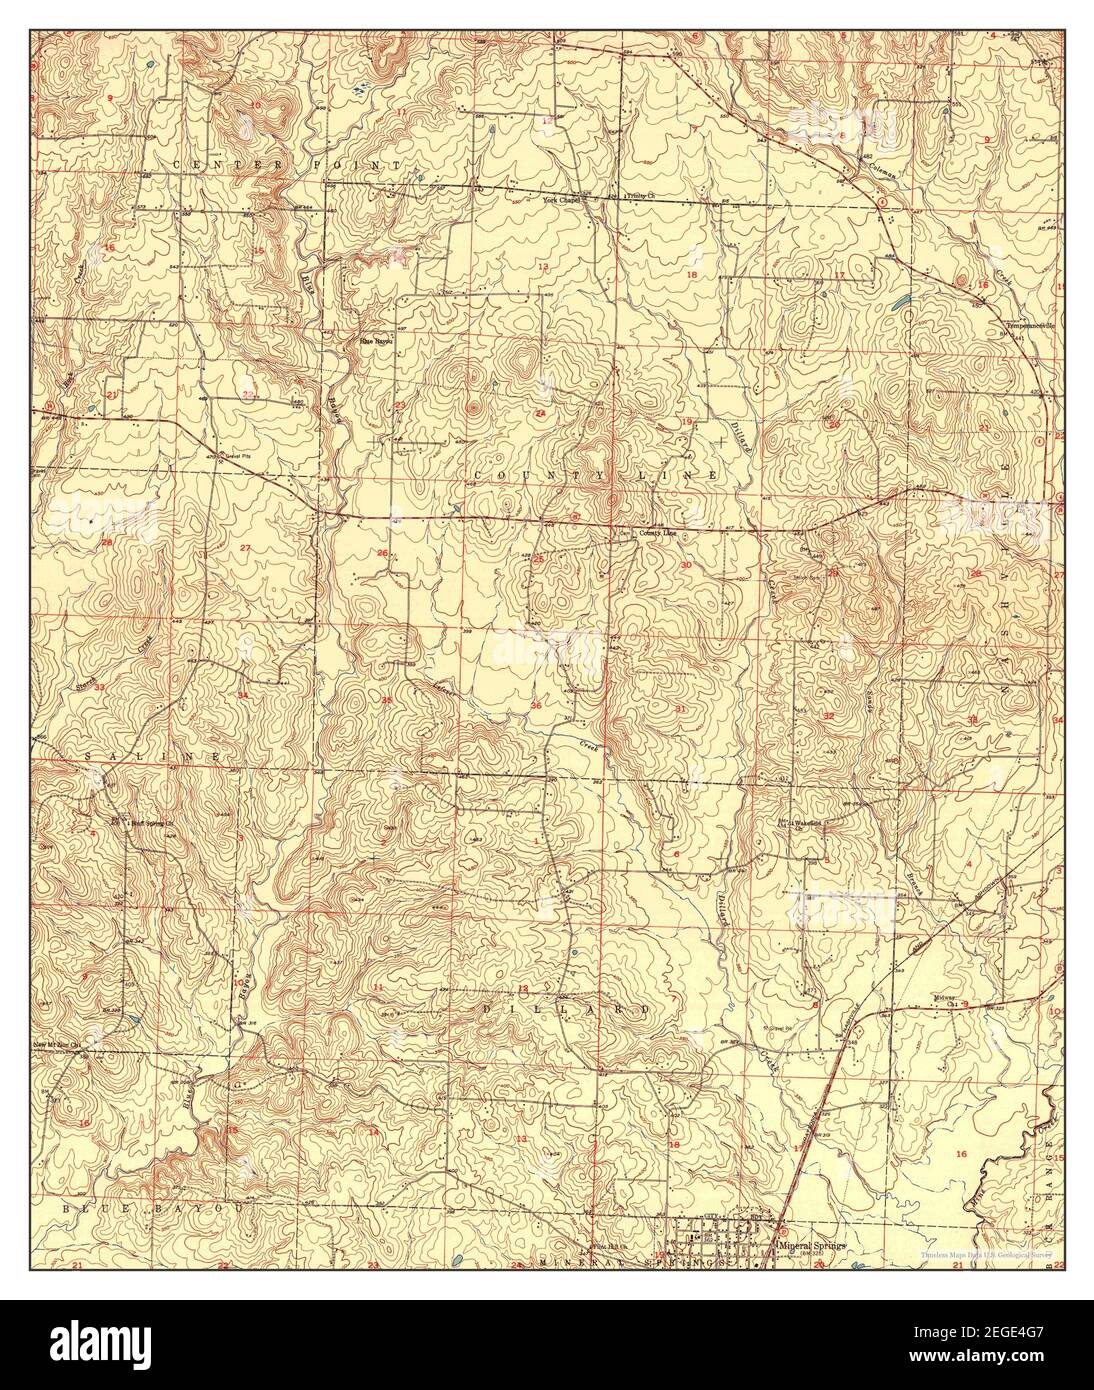 Mineral Springs North, Arkansas, map 1951, 1:24000, United States of America by Timeless Maps, data U.S. Geological Survey Foto Stock